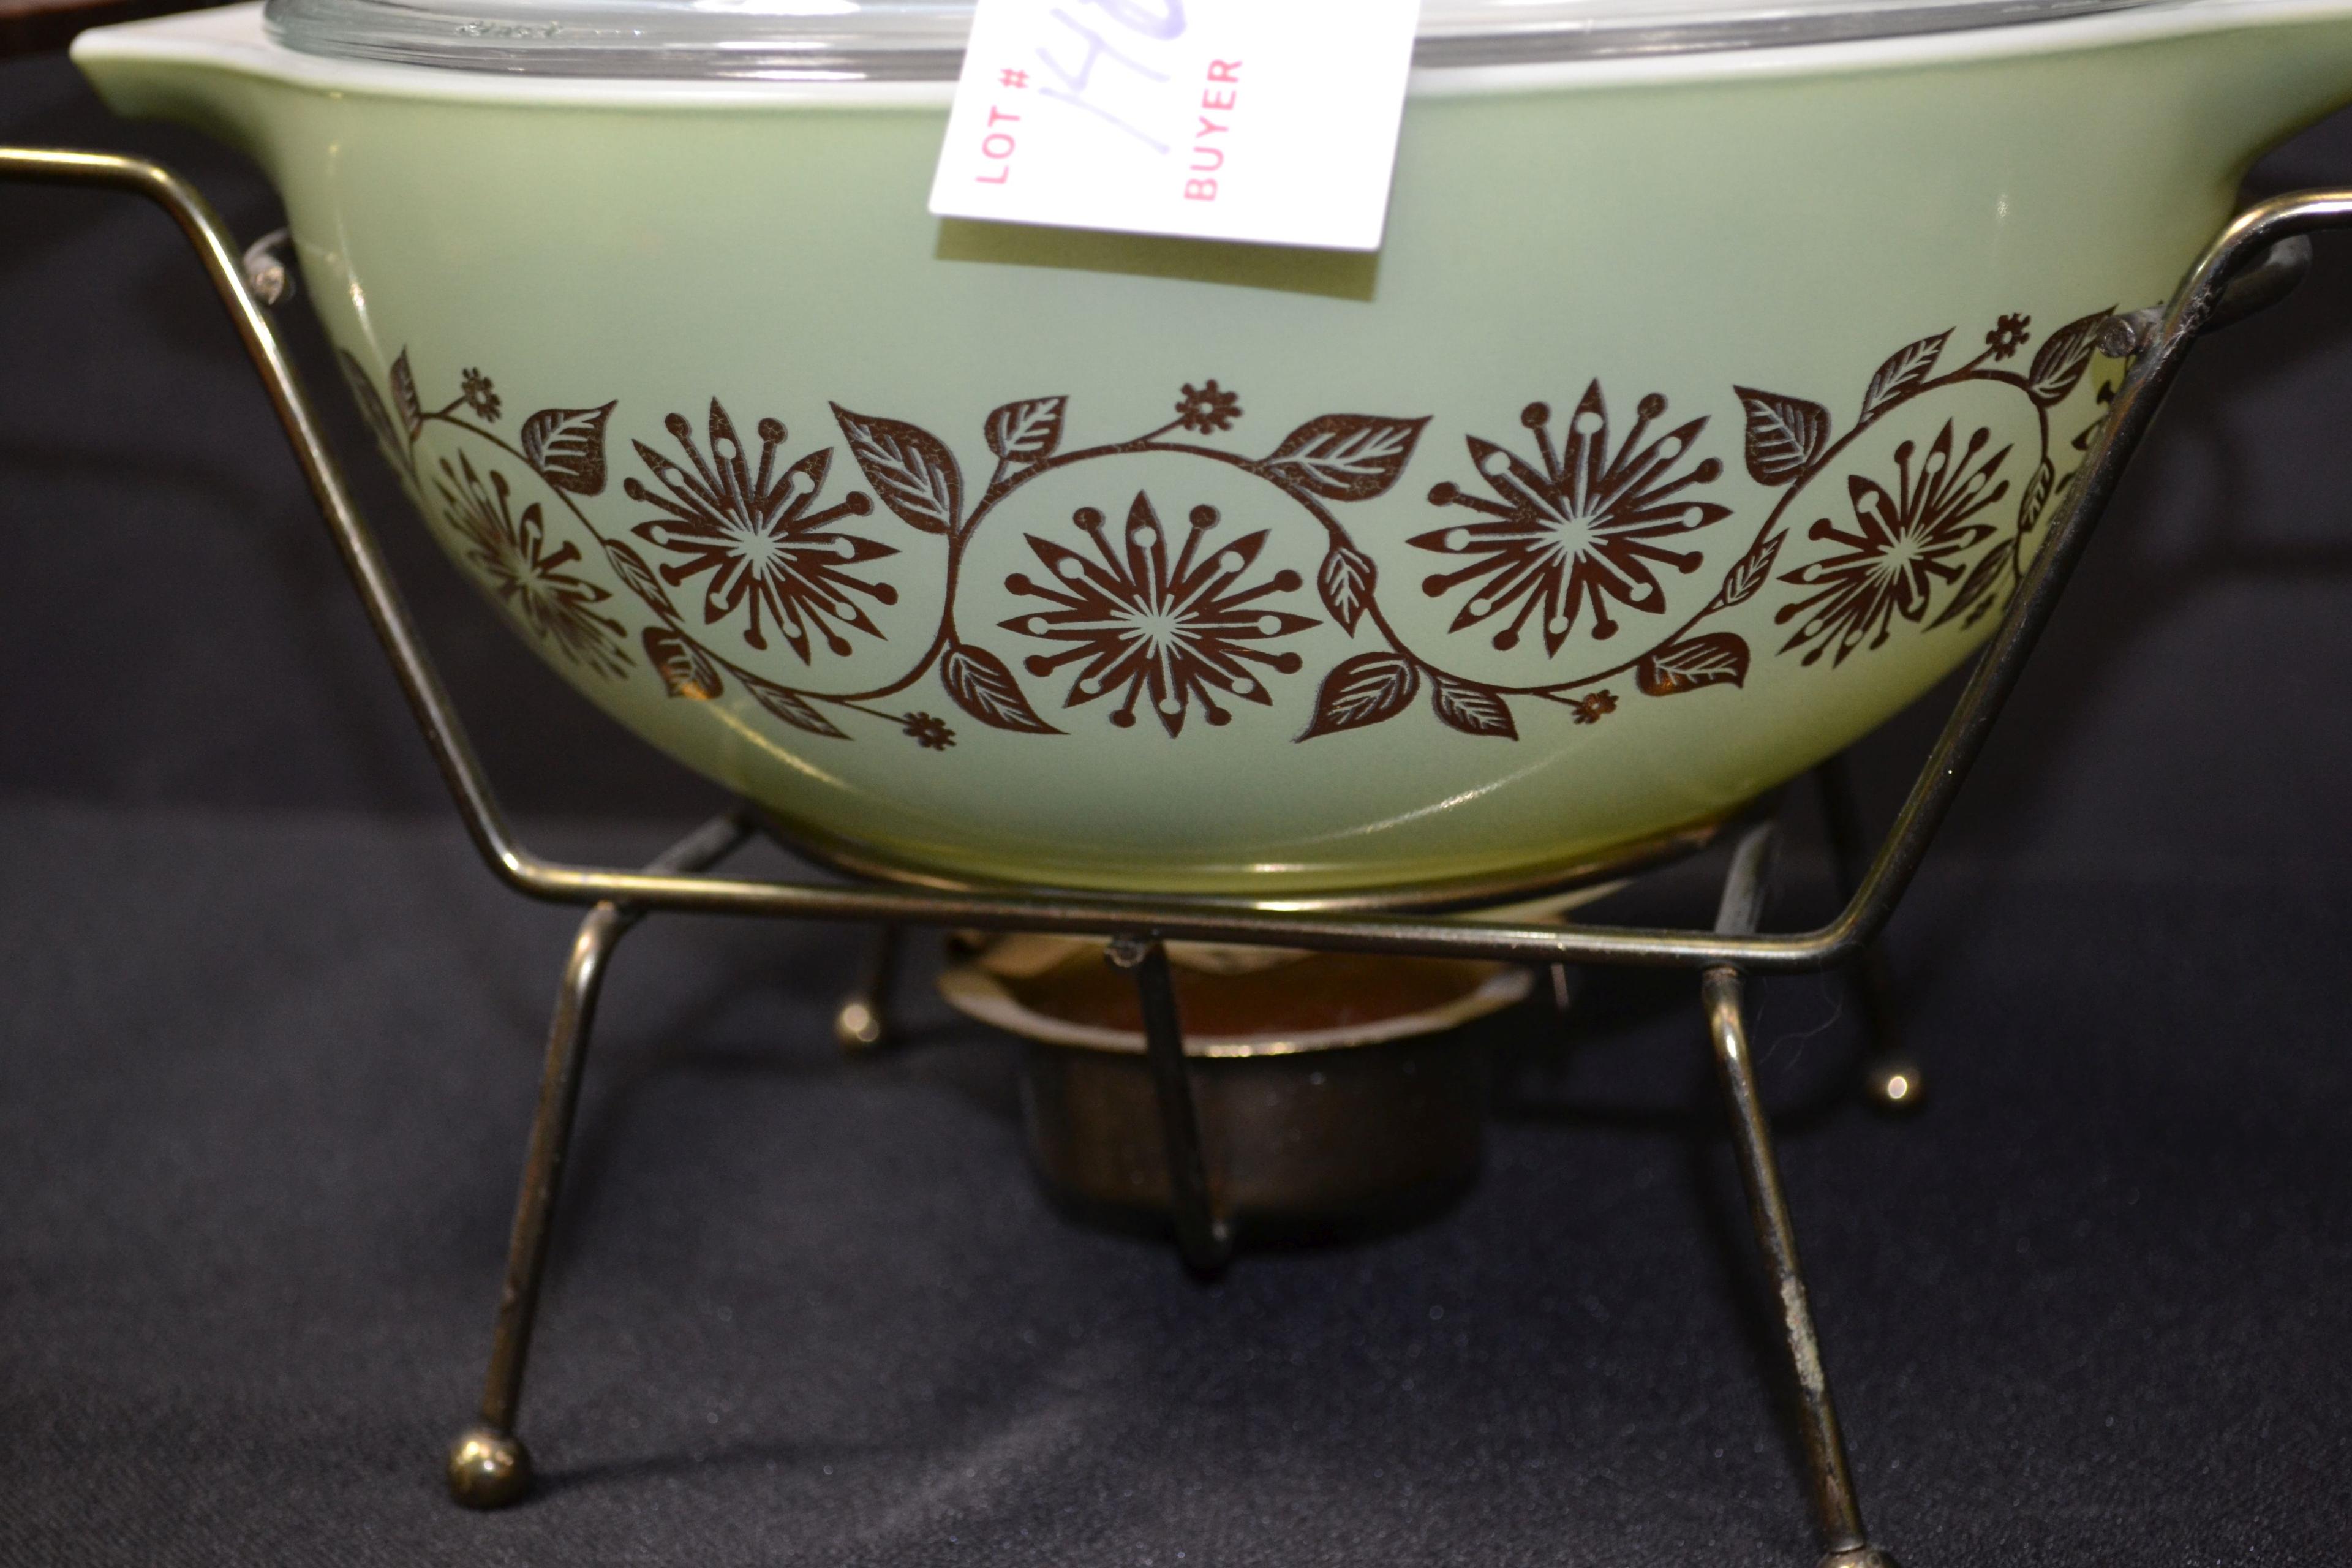 Pyrex 1962-63 Promotional Medallion Casserole 443 w/Lid and Cradle; No Chips